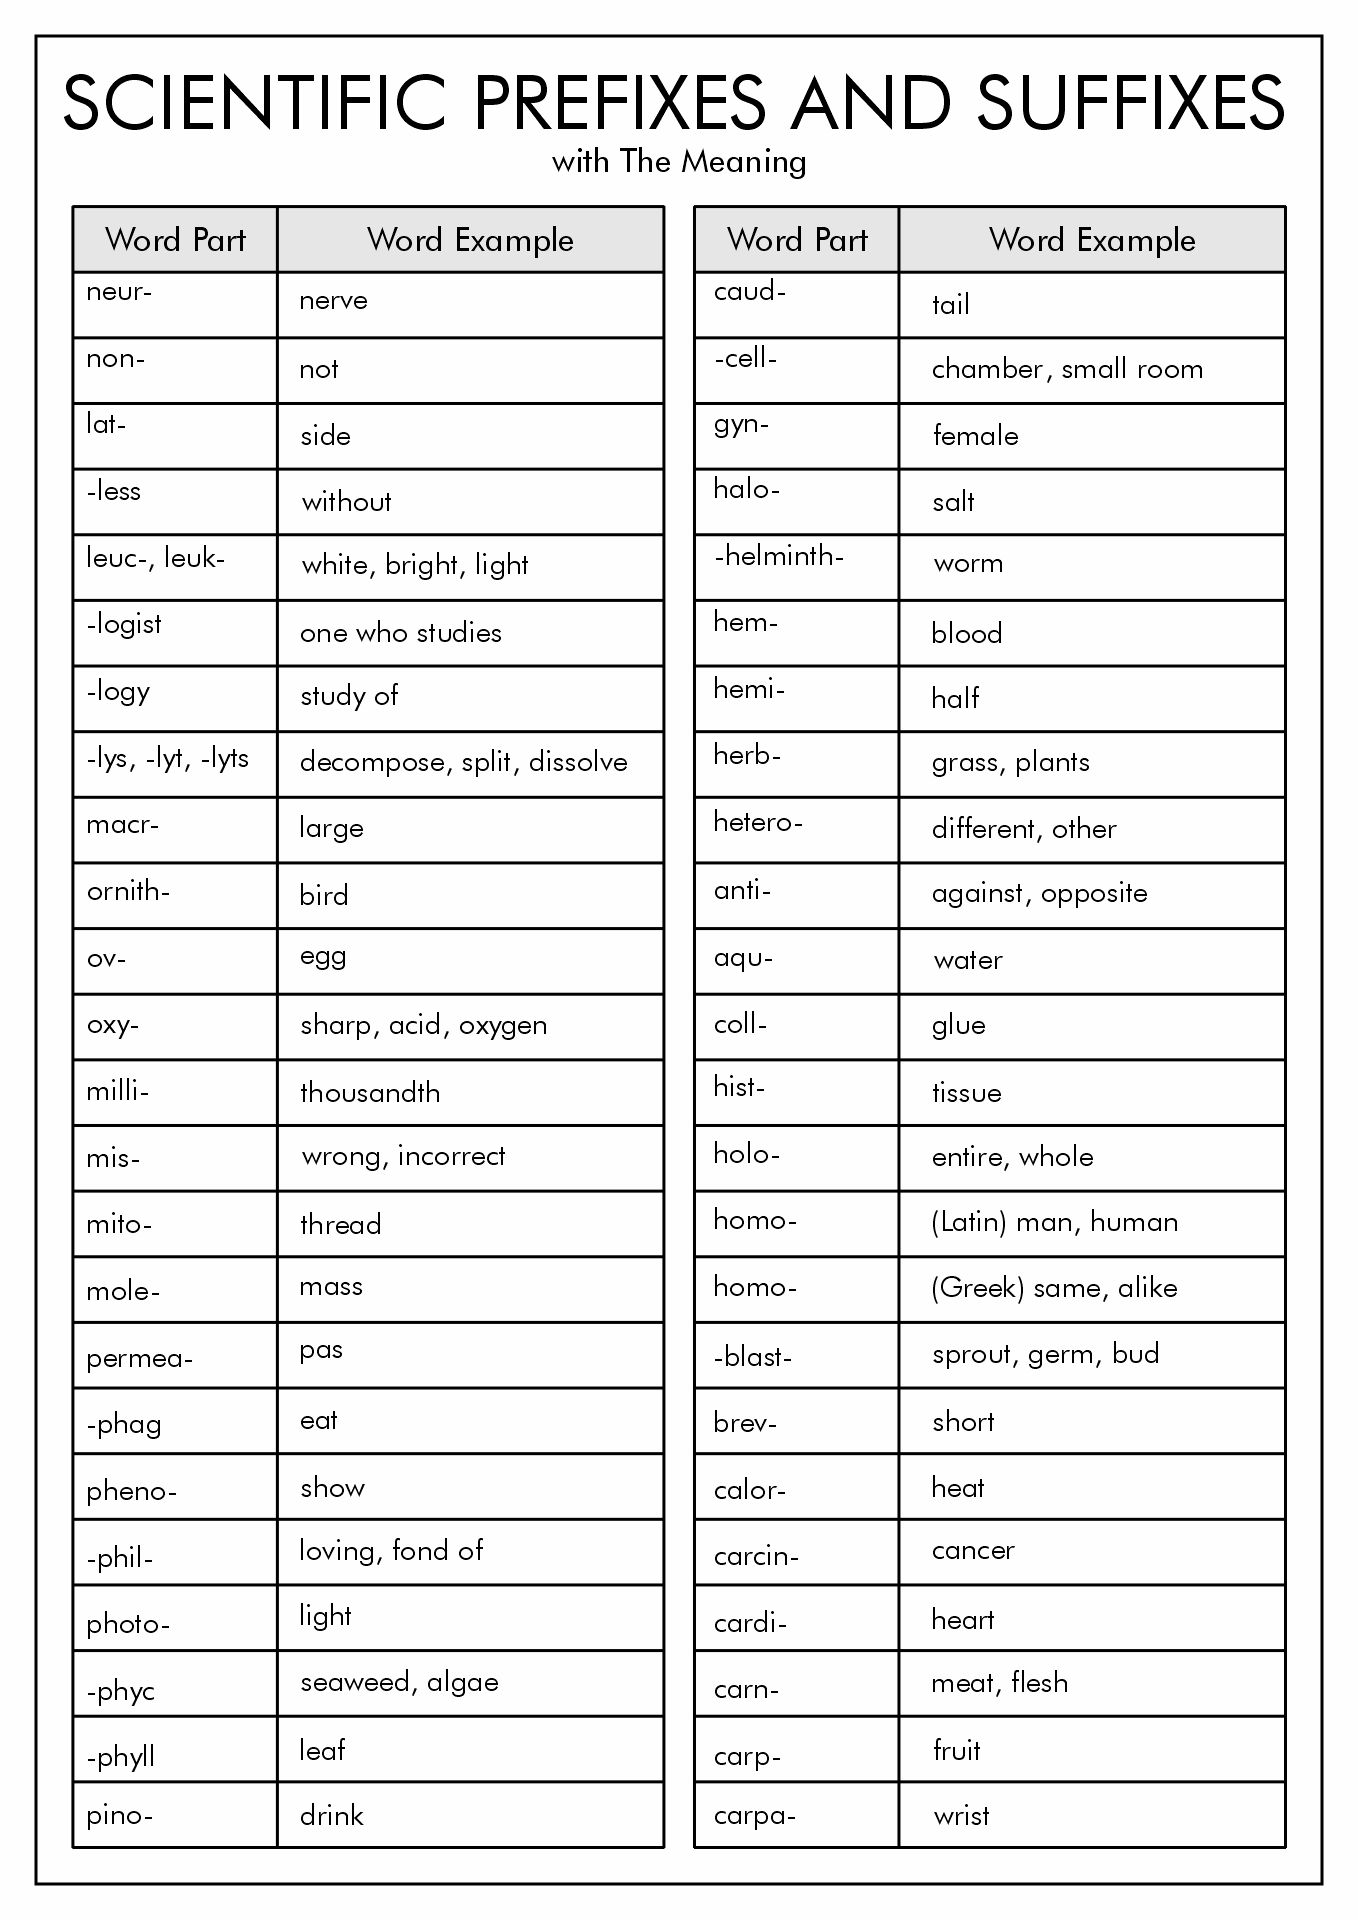 Science ROOT-WORDS Prefixes and Suffixes Image